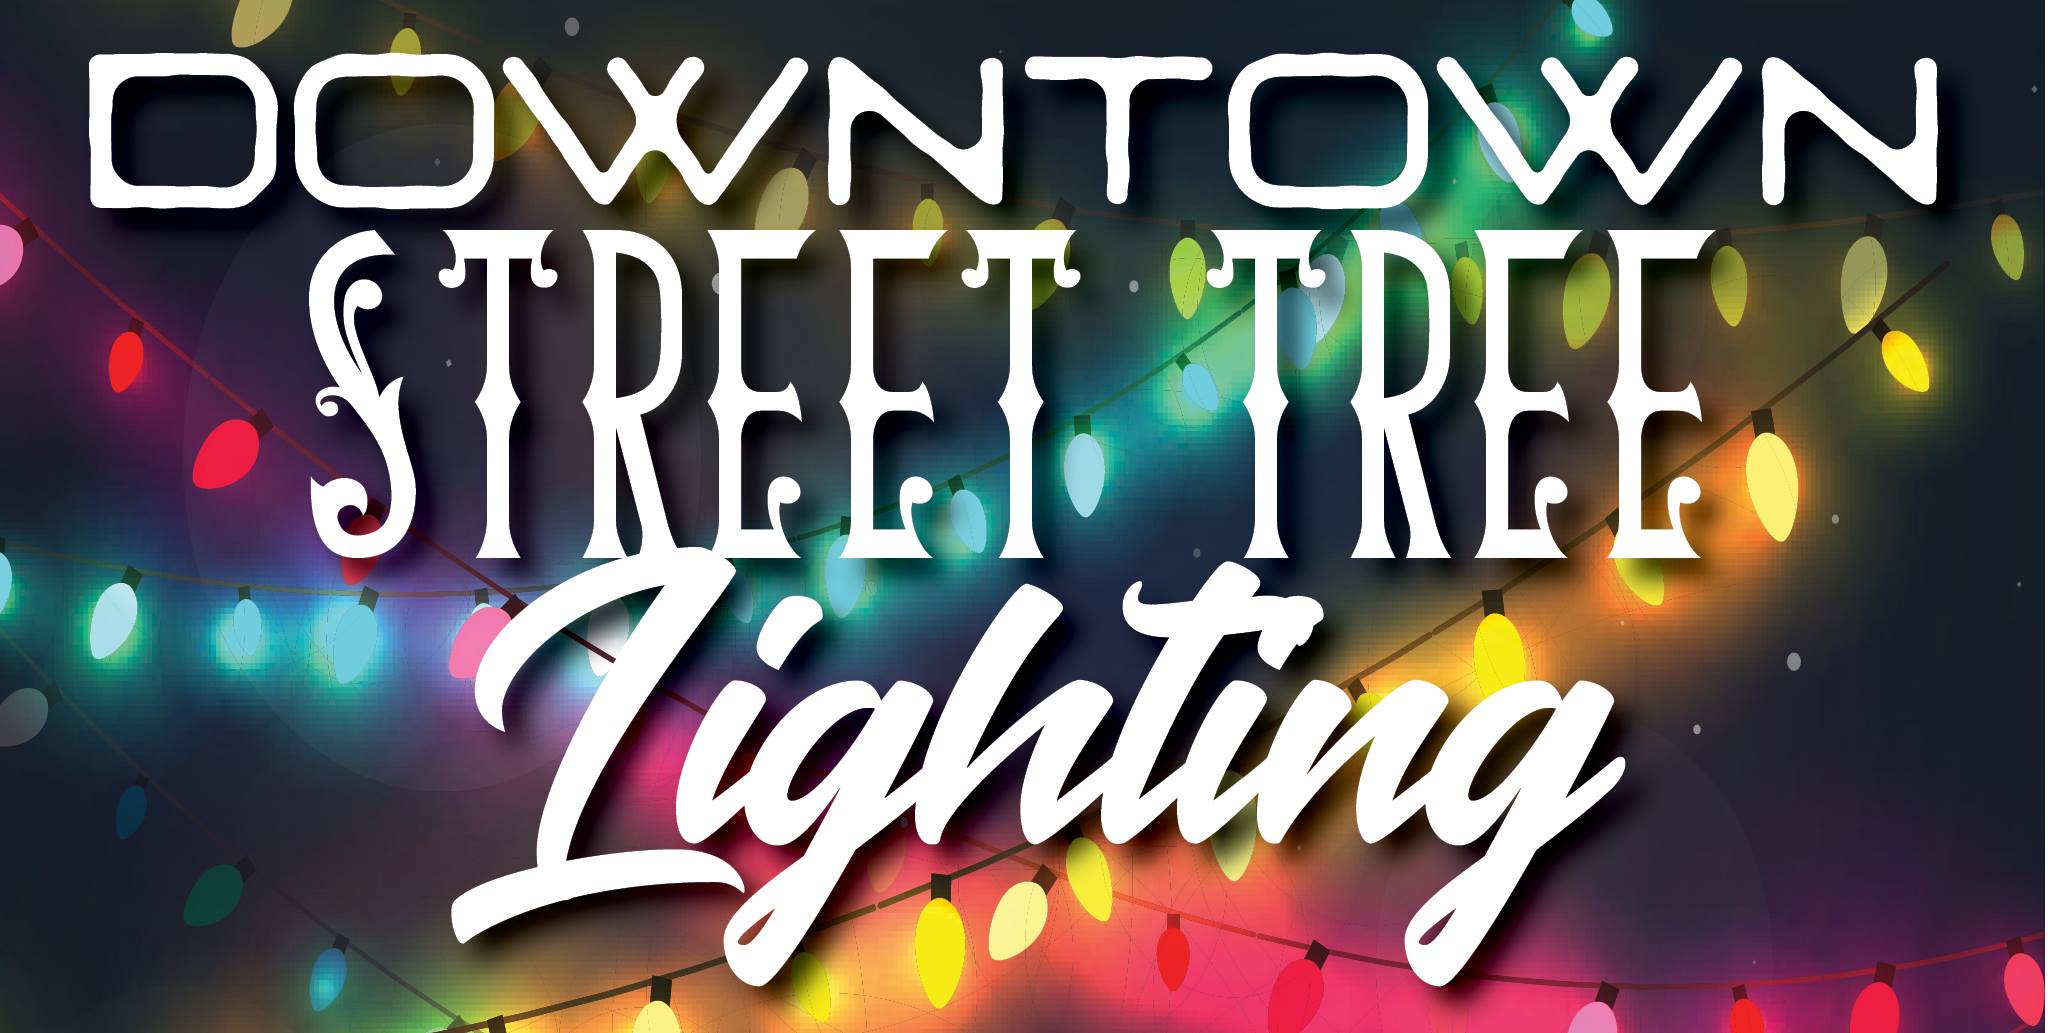 <h1 class="tribe-events-single-event-title">Moses Lake Tree Lighting</h1>